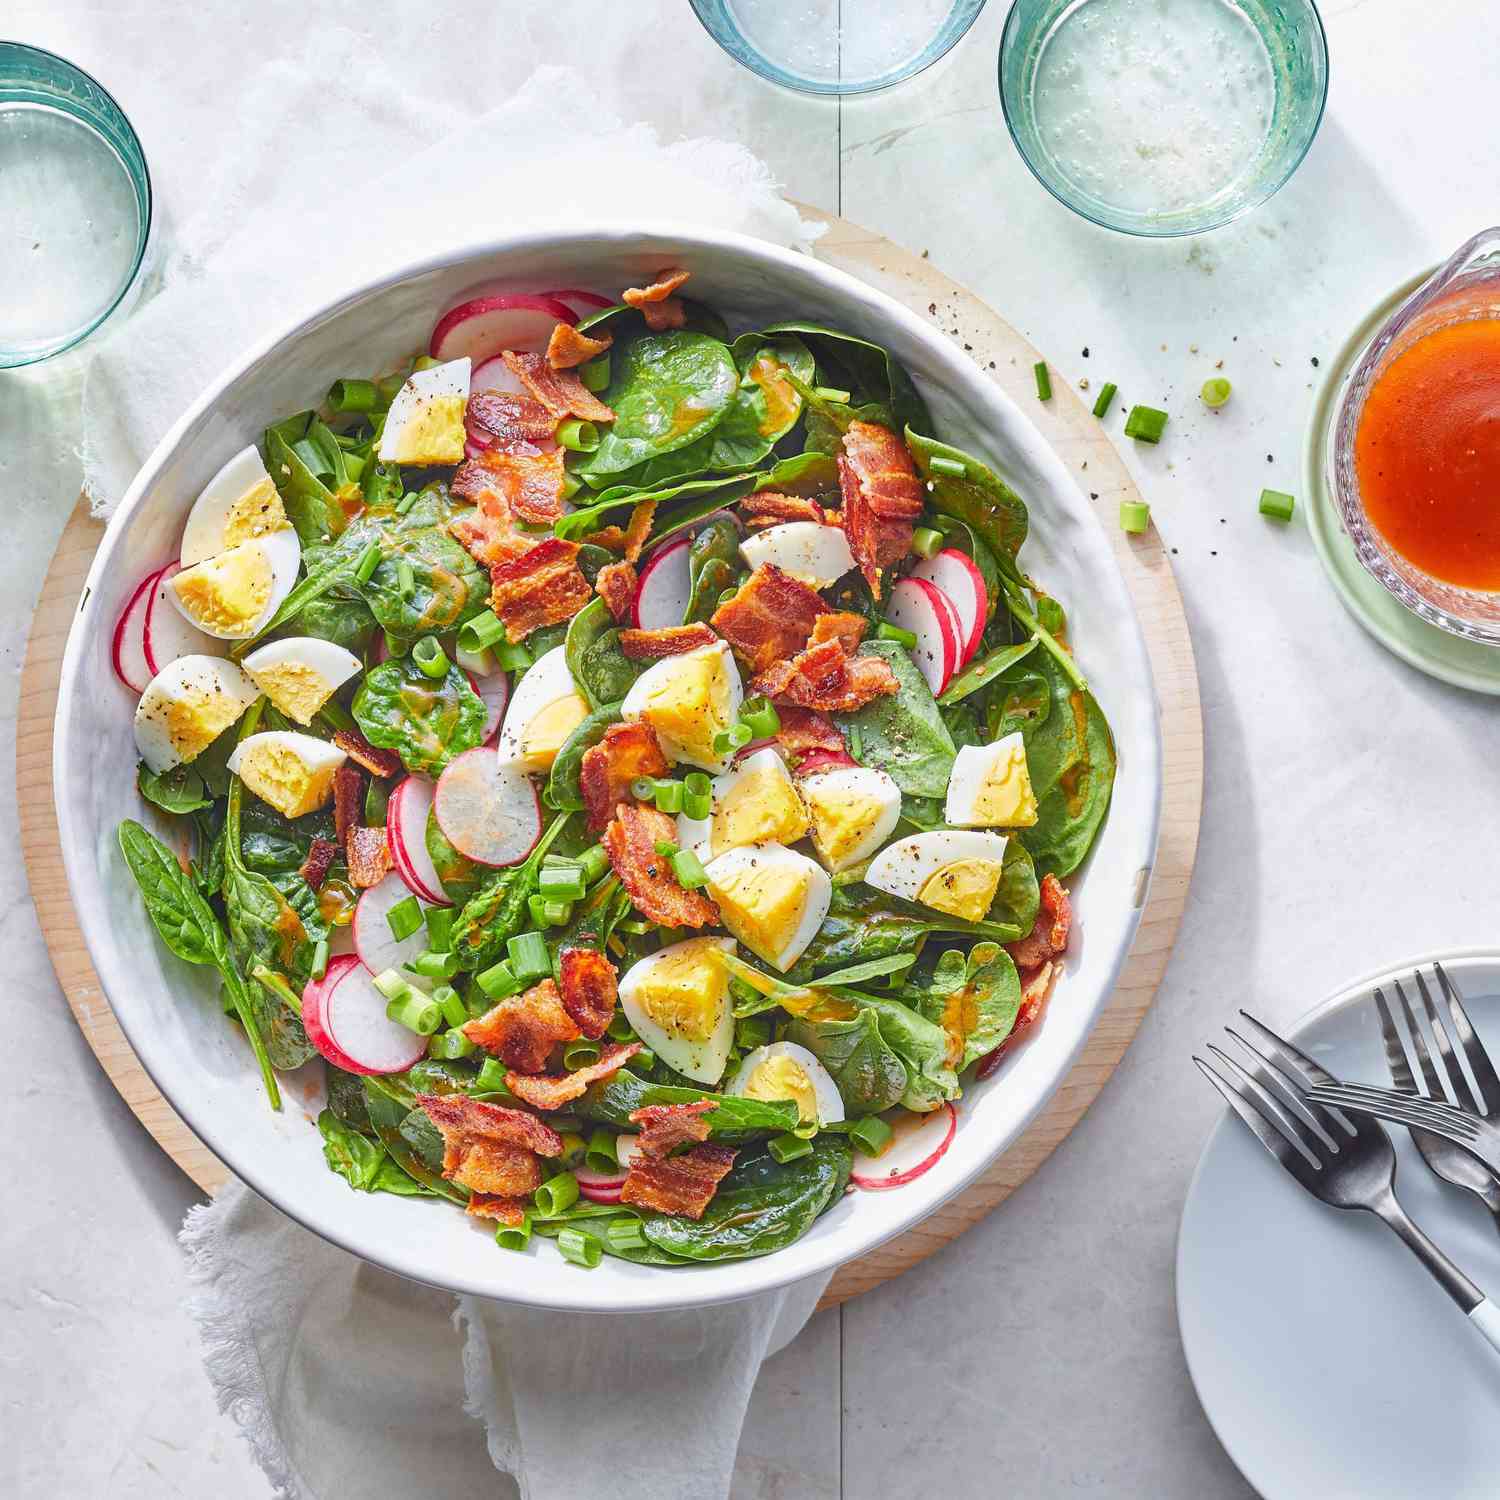 Spinach salad in a white bowl with bacon, eggs, radishes, and green onion